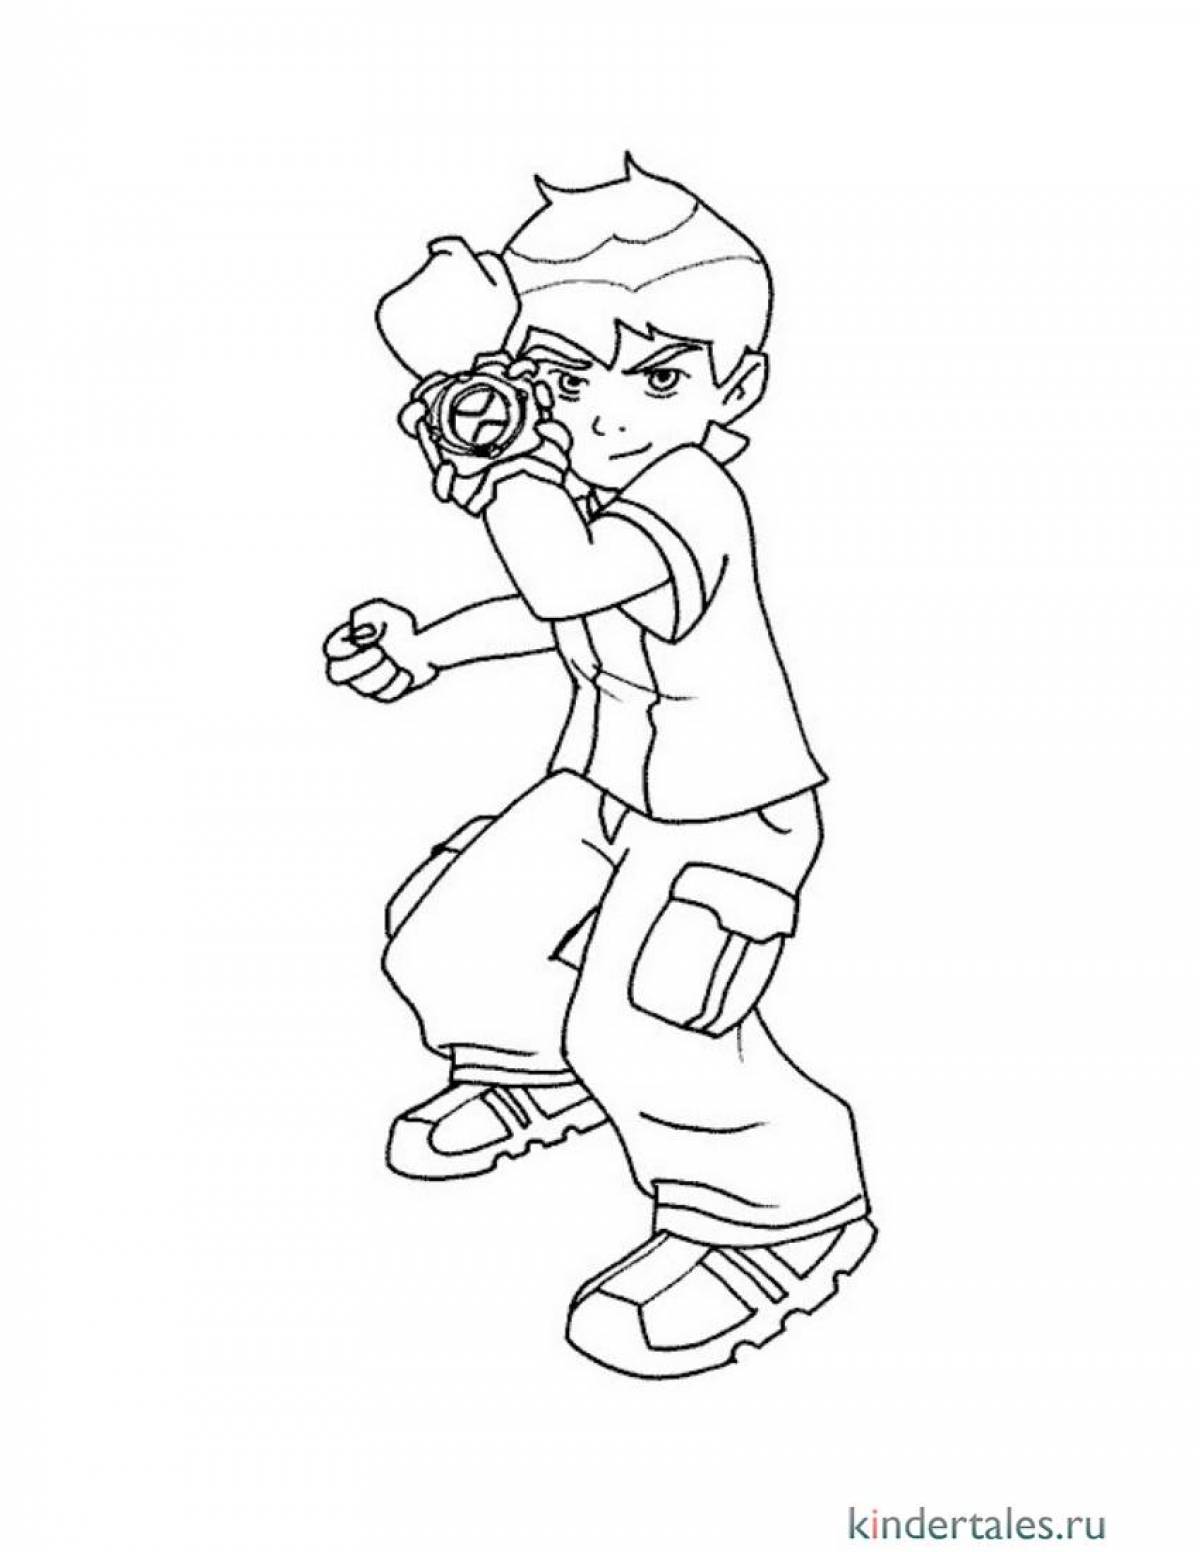 Glorious Brawl Star Coloring Page